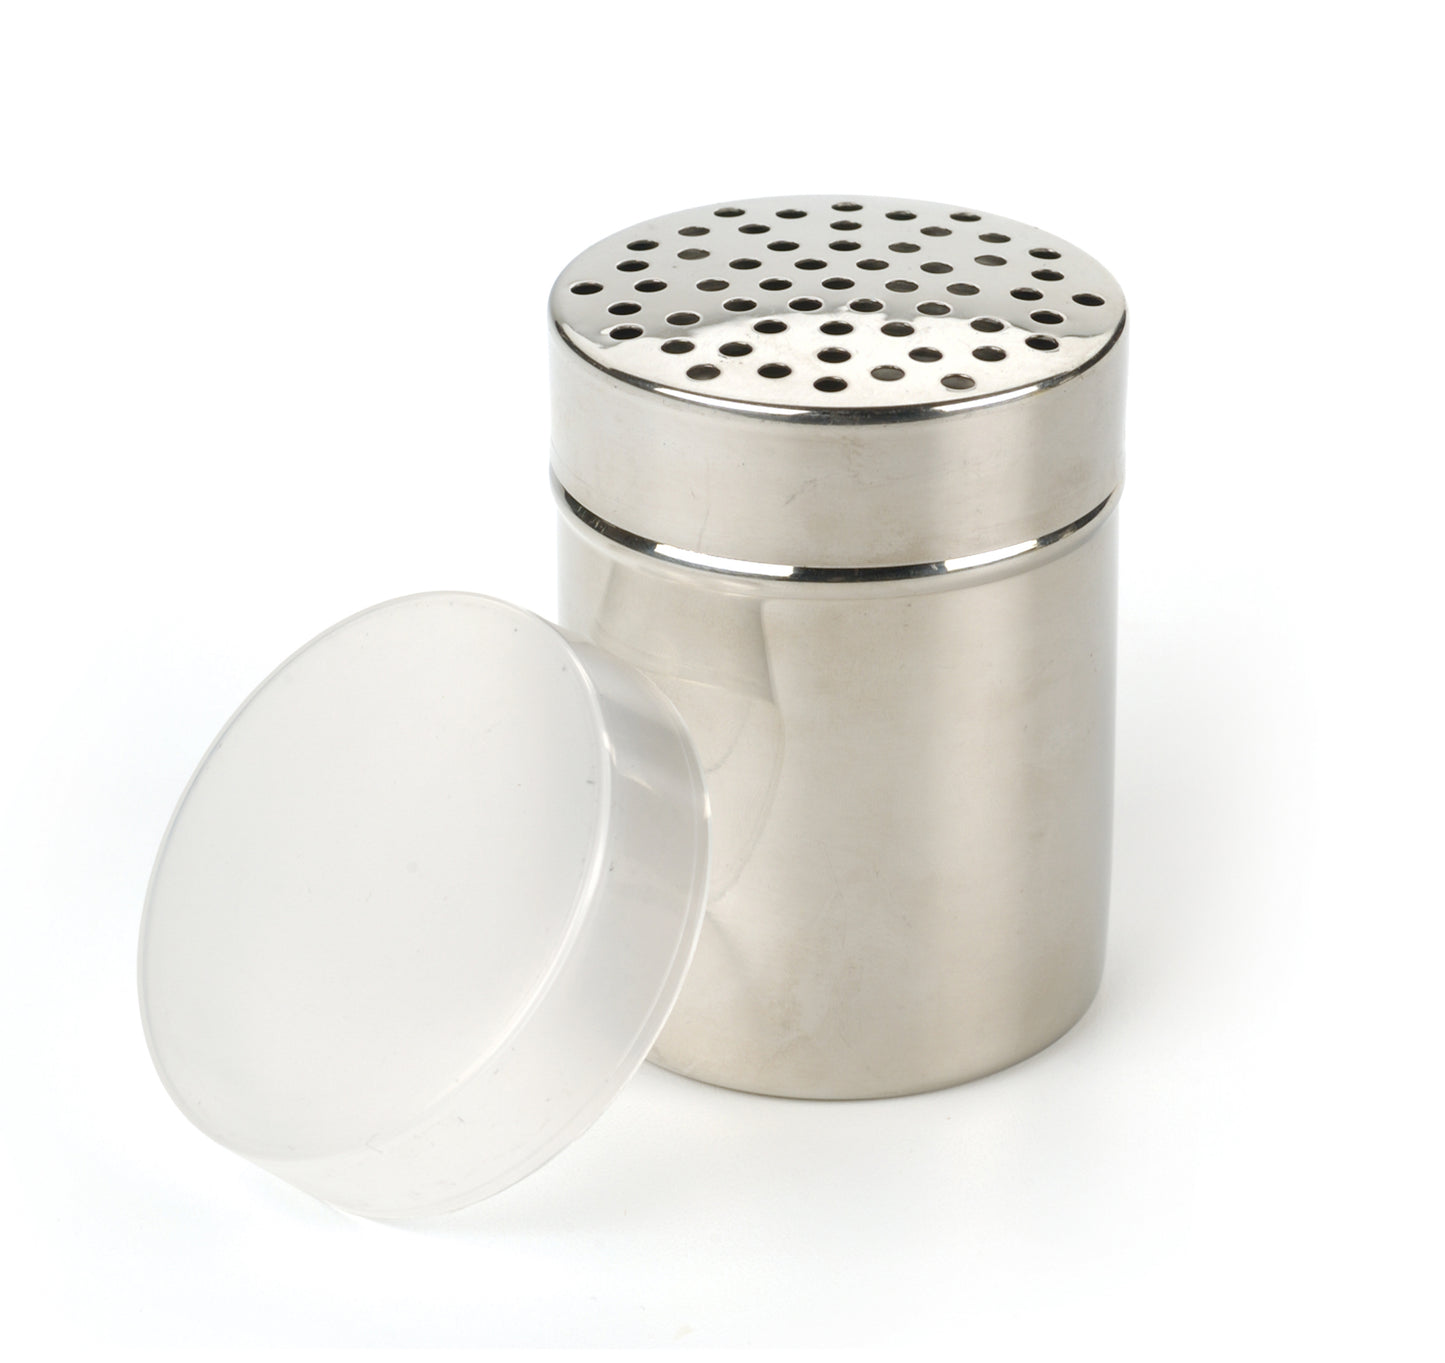 stainless steel shaker with wide holes in lid and plastic lid cover leaning against it.